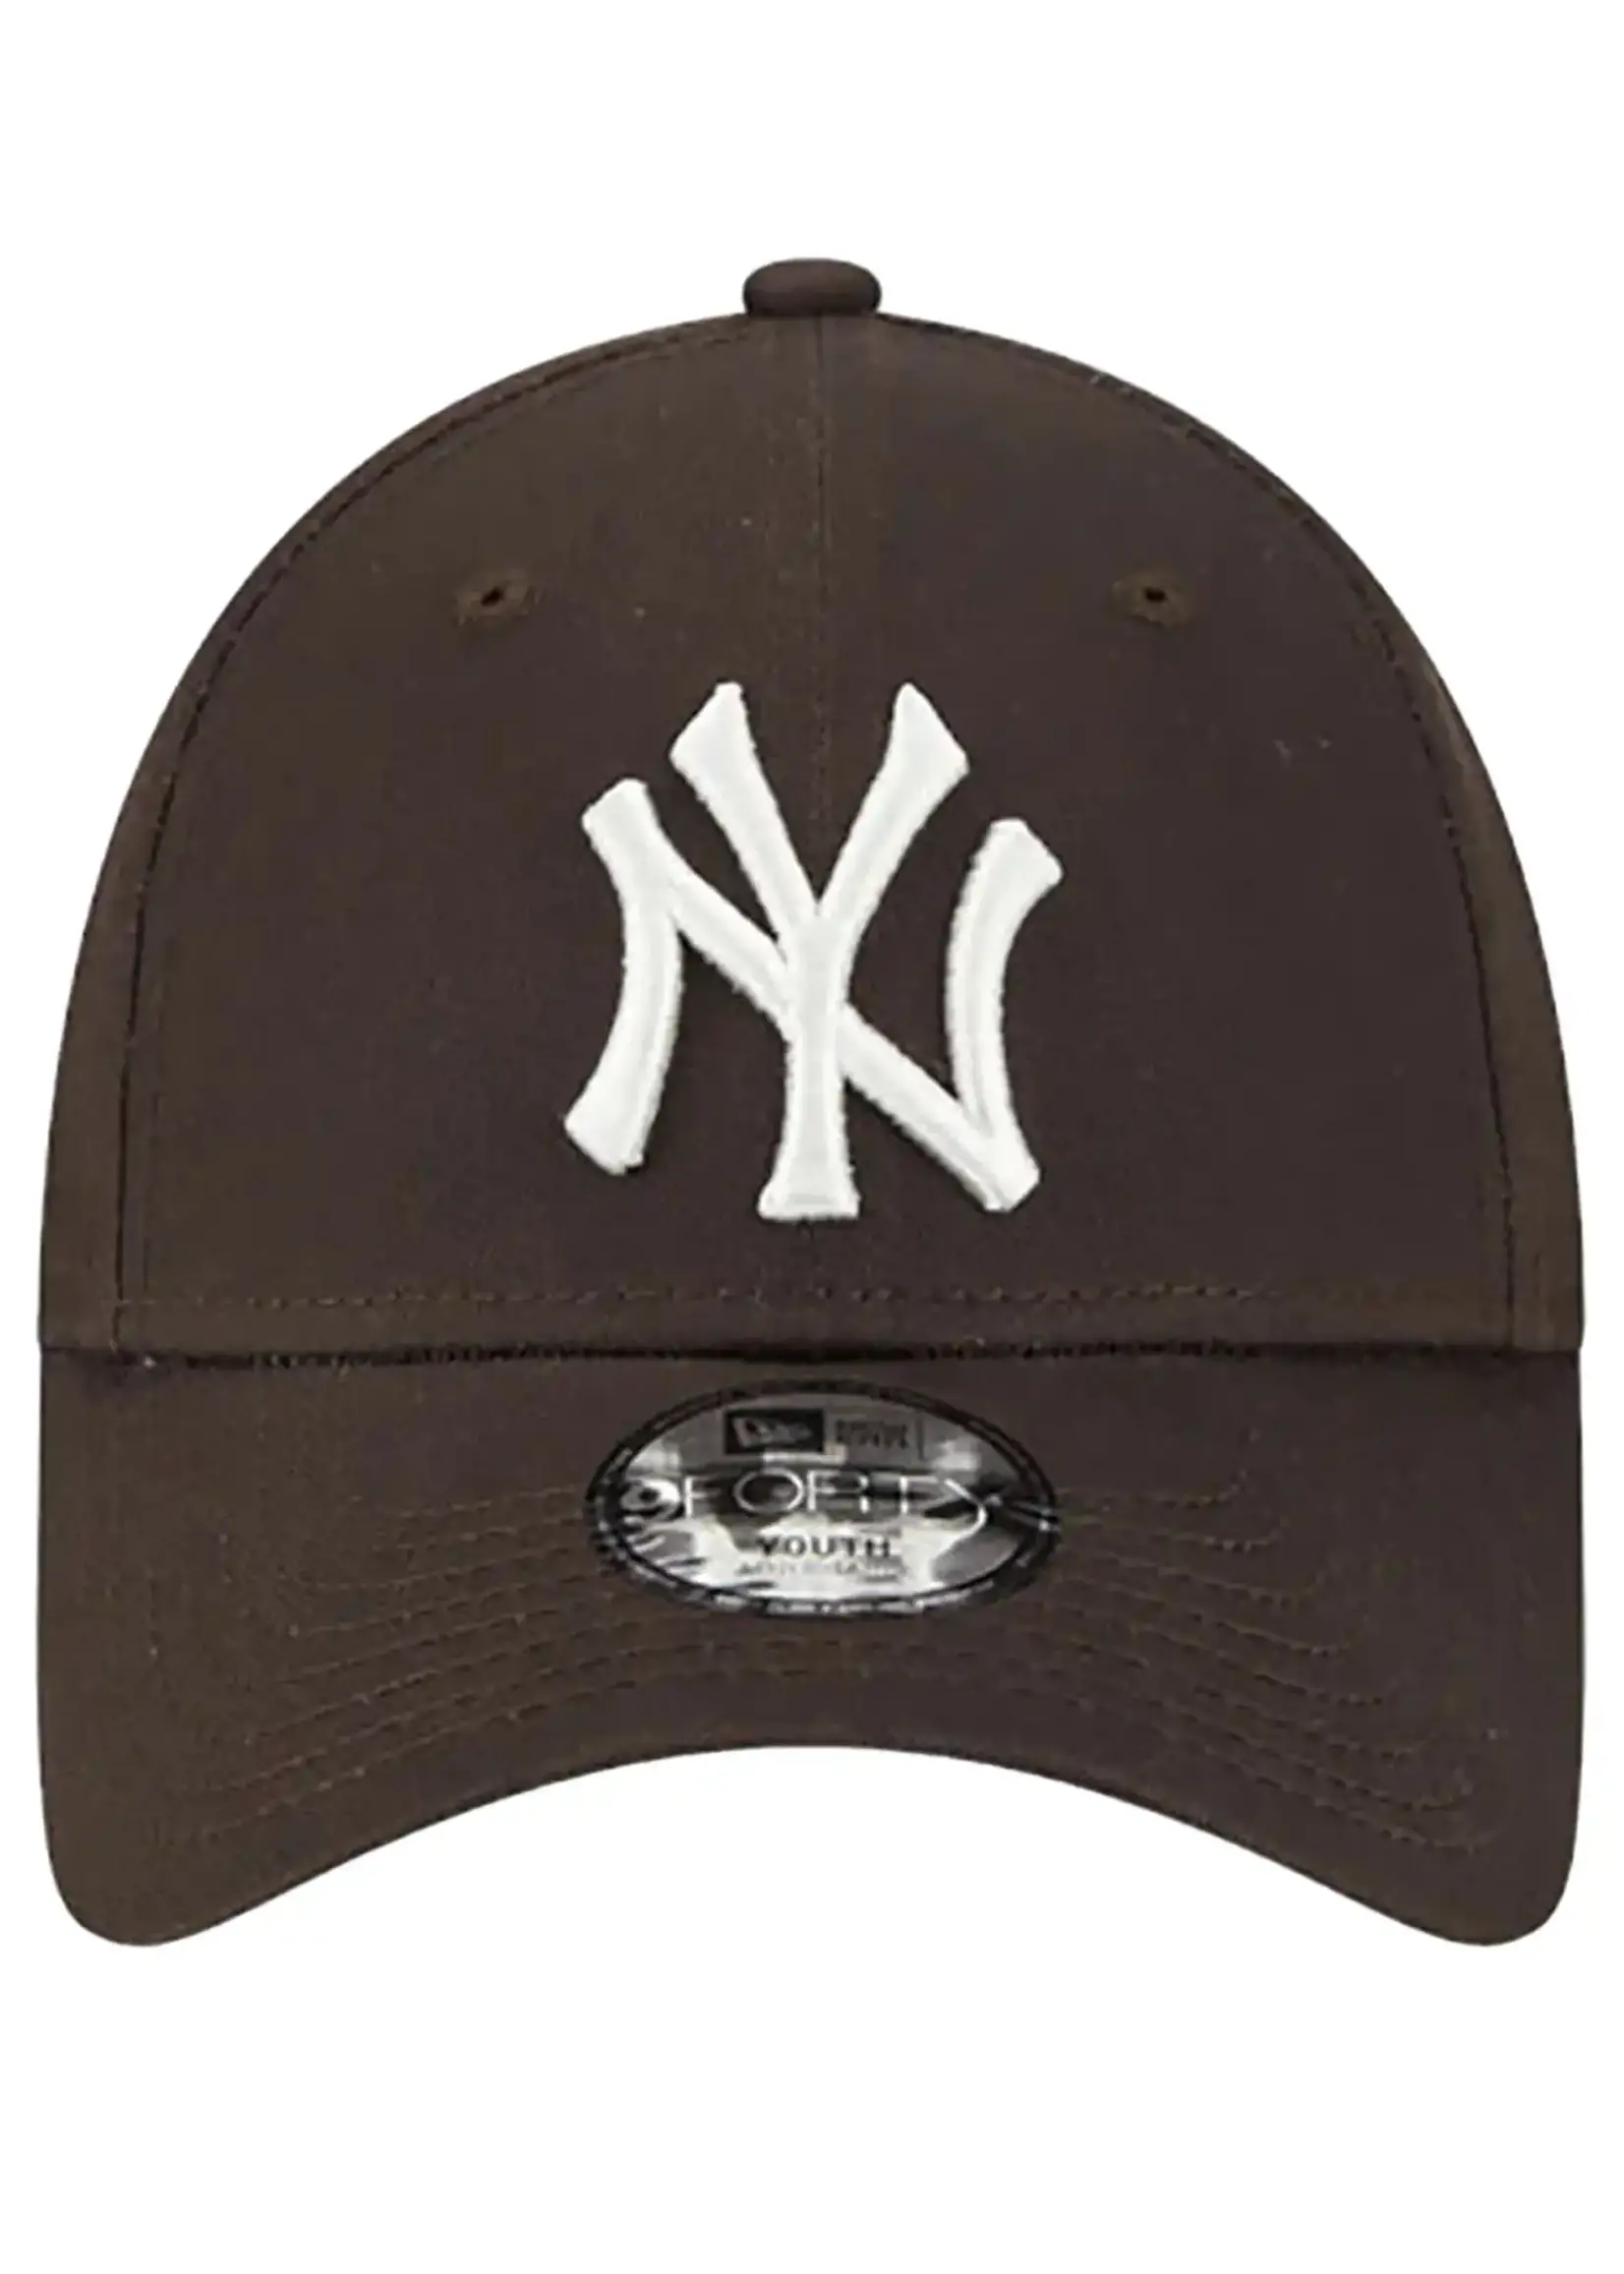 New Era New York Yankees  9Forty Youth Cap Brown White